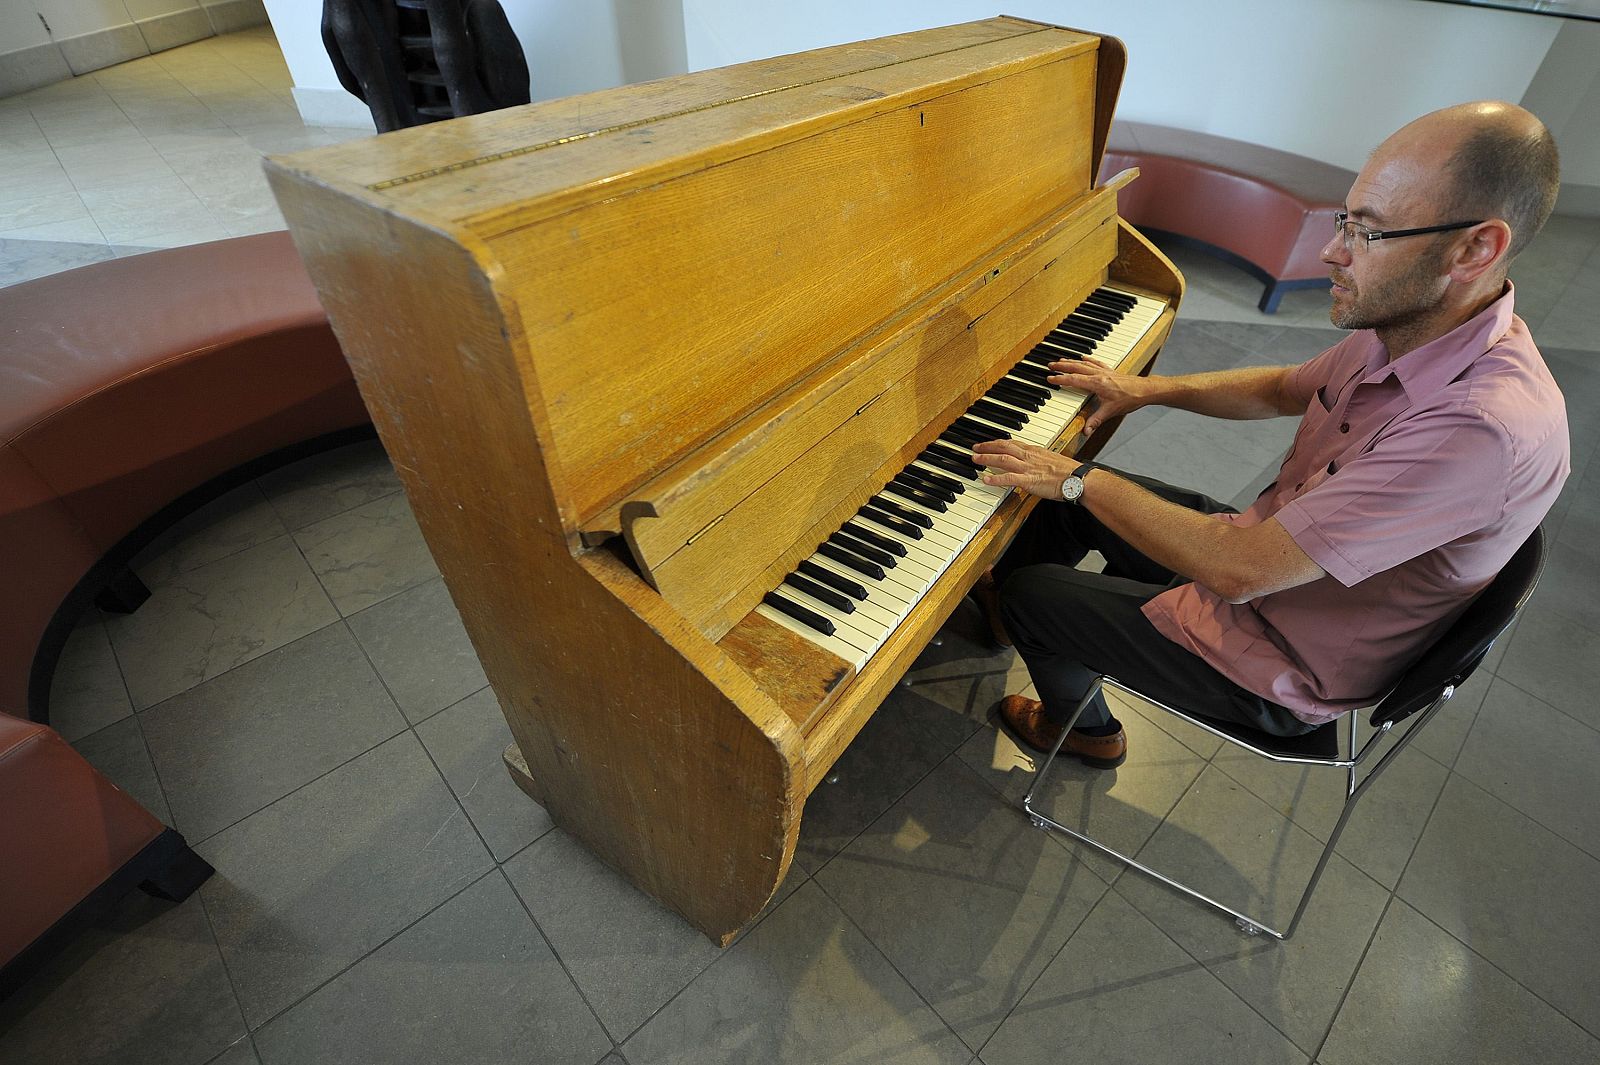 British fashion designer Hemingway plays a piano at the Bonhams auction rooms in Bond Street in central London